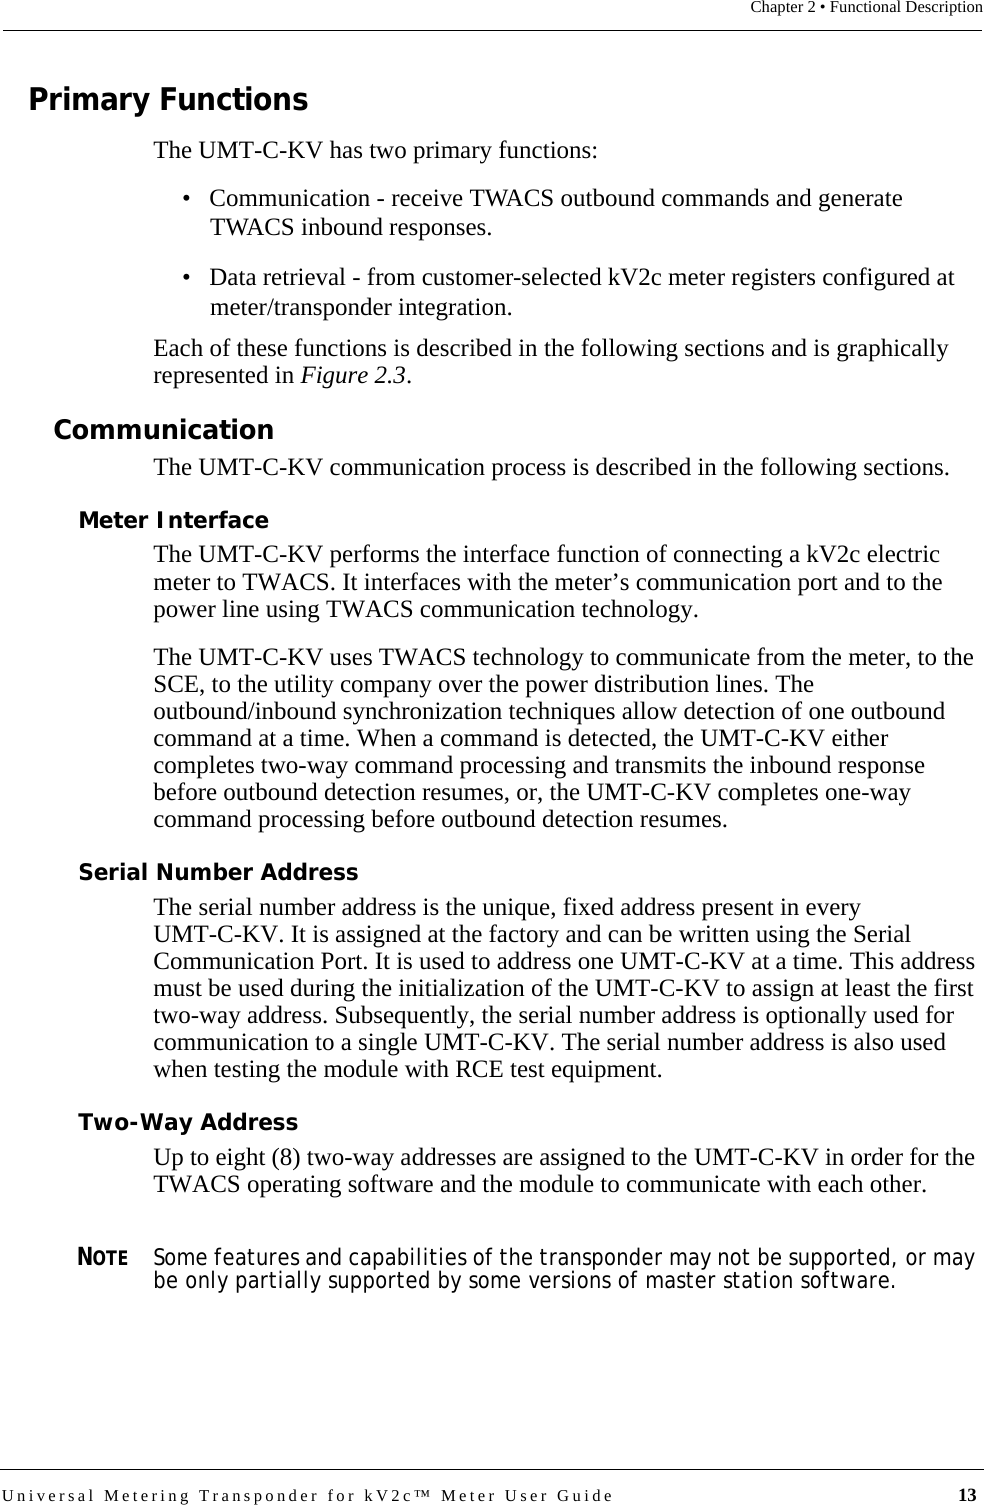 Universal Metering Transponder for kV2c™ Meter User Guide  13Chapter 2 • Functional DescriptionPrimary FunctionsThe UMT-C-KV has two primary functions:• Communication - receive TWACS outbound commands and generate TWACS inbound responses. • Data retrieval - from customer-selected kV2c meter registers configured at meter/transponder integration.Each of these functions is described in the following sections and is graphically represented in Figure 2.3.CommunicationThe UMT-C-KV communication process is described in the following sections.Meter InterfaceThe UMT-C-KV performs the interface function of connecting a kV2c electric meter to TWACS. It interfaces with the meter’s communication port and to the power line using TWACS communication technology. The UMT-C-KV uses TWACS technology to communicate from the meter, to the SCE, to the utility company over the power distribution lines. The outbound/inbound synchronization techniques allow detection of one outbound command at a time. When a command is detected, the UMT-C-KV either completes two-way command processing and transmits the inbound response before outbound detection resumes, or, the UMT-C-KV completes one-way command processing before outbound detection resumes.Serial Number AddressThe serial number address is the unique, fixed address present in every UMT-C-KV. It is assigned at the factory and can be written using the Serial Communication Port. It is used to address one UMT-C-KV at a time. This address must be used during the initialization of the UMT-C-KV to assign at least the first two-way address. Subsequently, the serial number address is optionally used for communication to a single UMT-C-KV. The serial number address is also used when testing the module with RCE test equipment.Two-Way AddressUp to eight (8) two-way addresses are assigned to the UMT-C-KV in order for the TWACS operating software and the module to communicate with each other.NOTESome features and capabilities of the transponder may not be supported, or may be only partially supported by some versions of master station software.